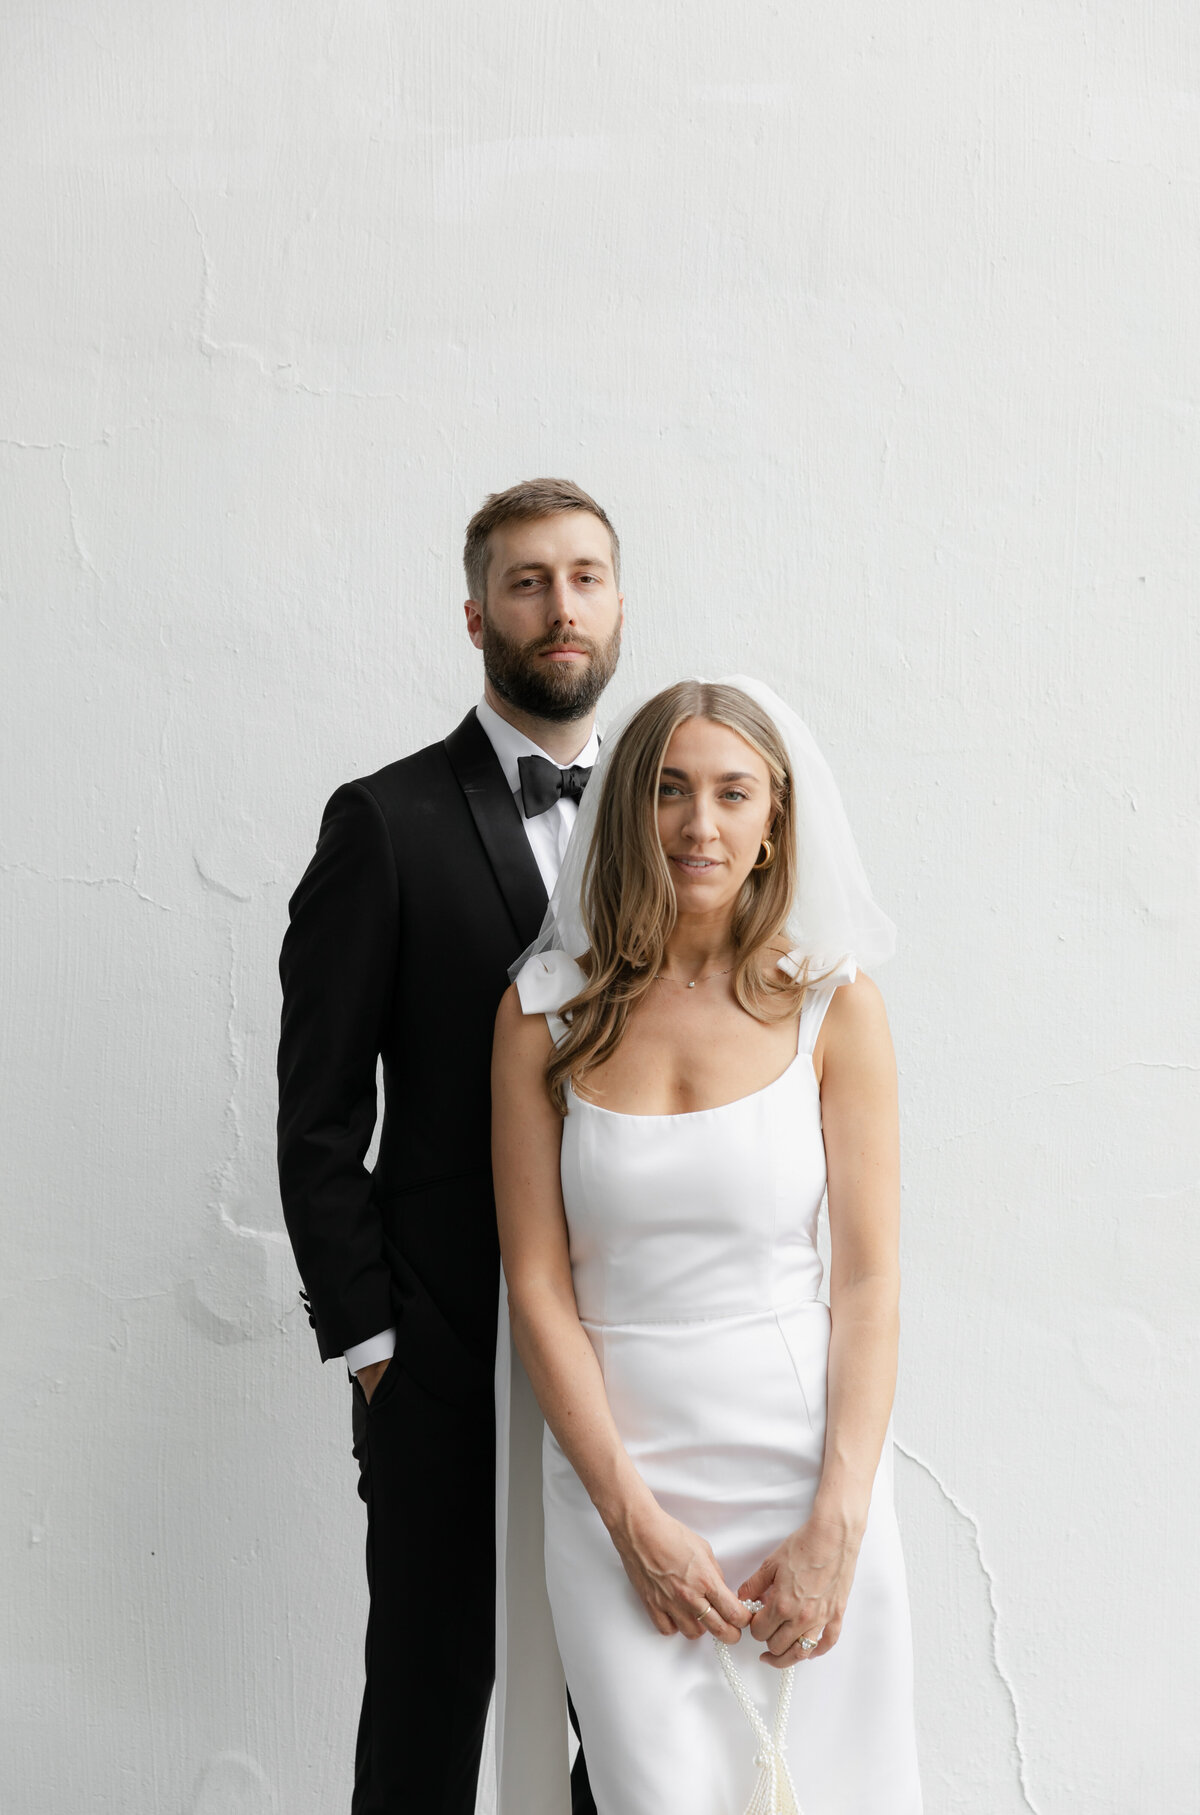 Bride and groom stand in front of white wall at Elske restaurant, Chicago.